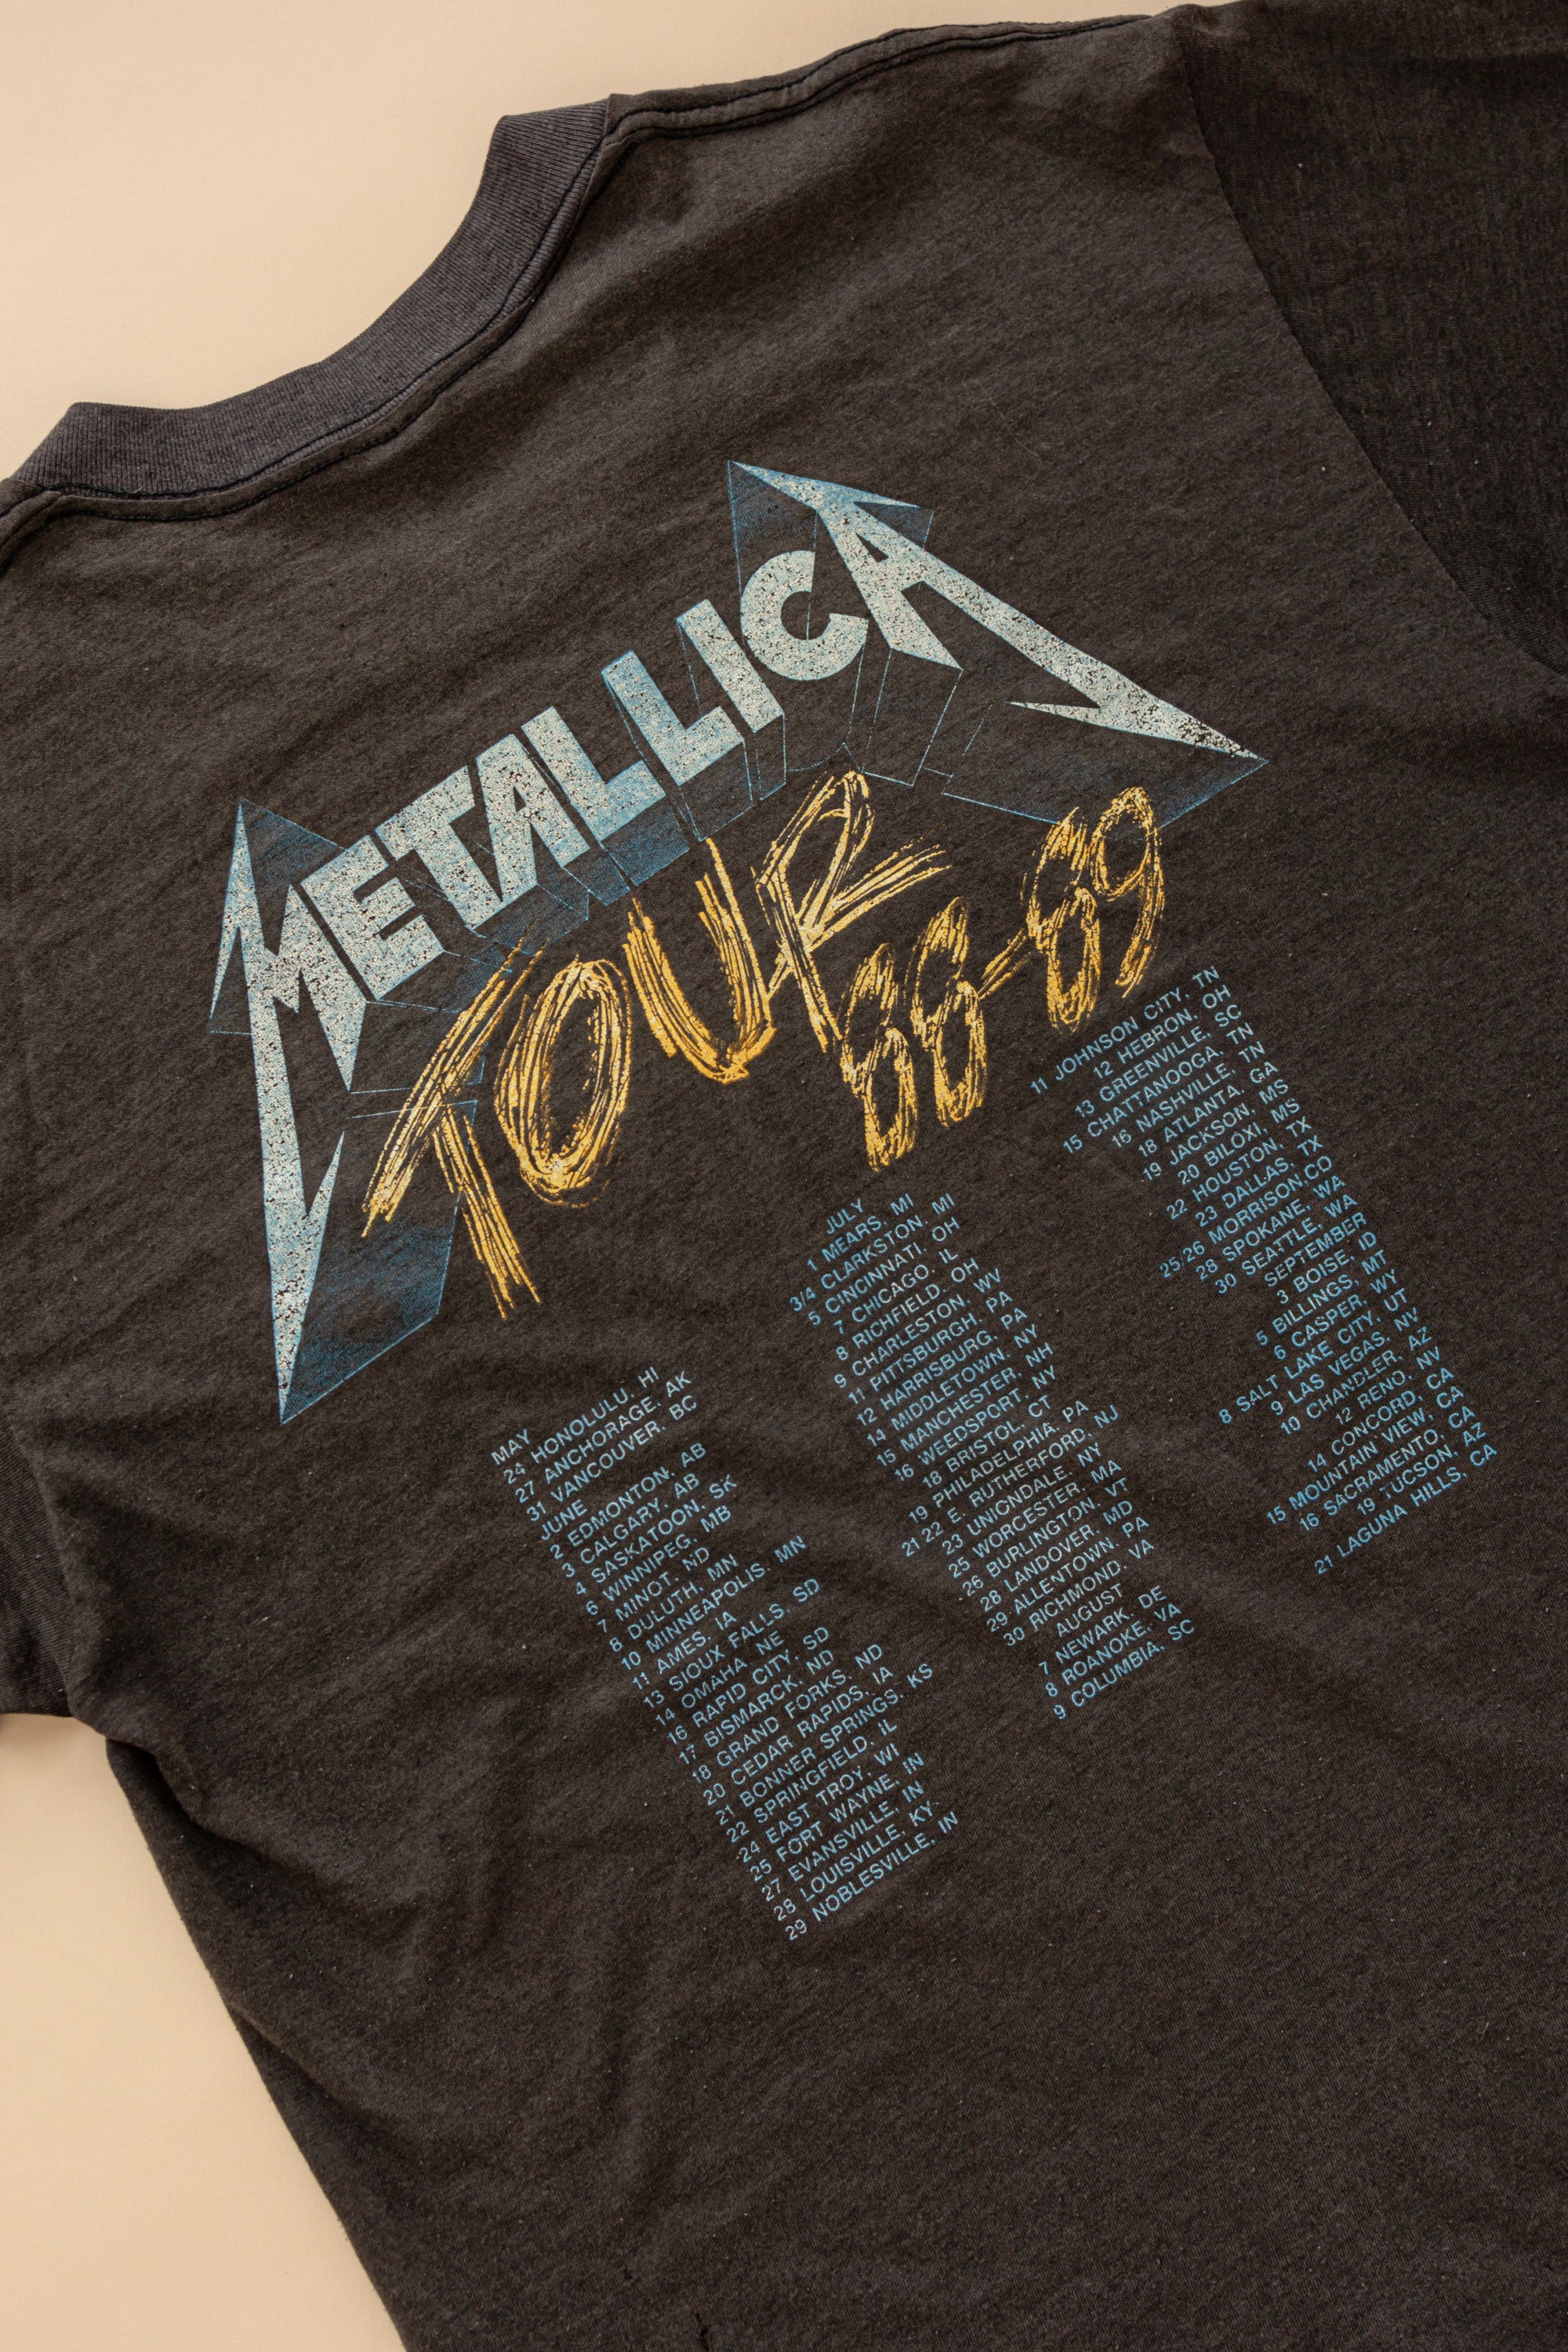 Justice For All Tour 88-89 Metallica T-Shirt